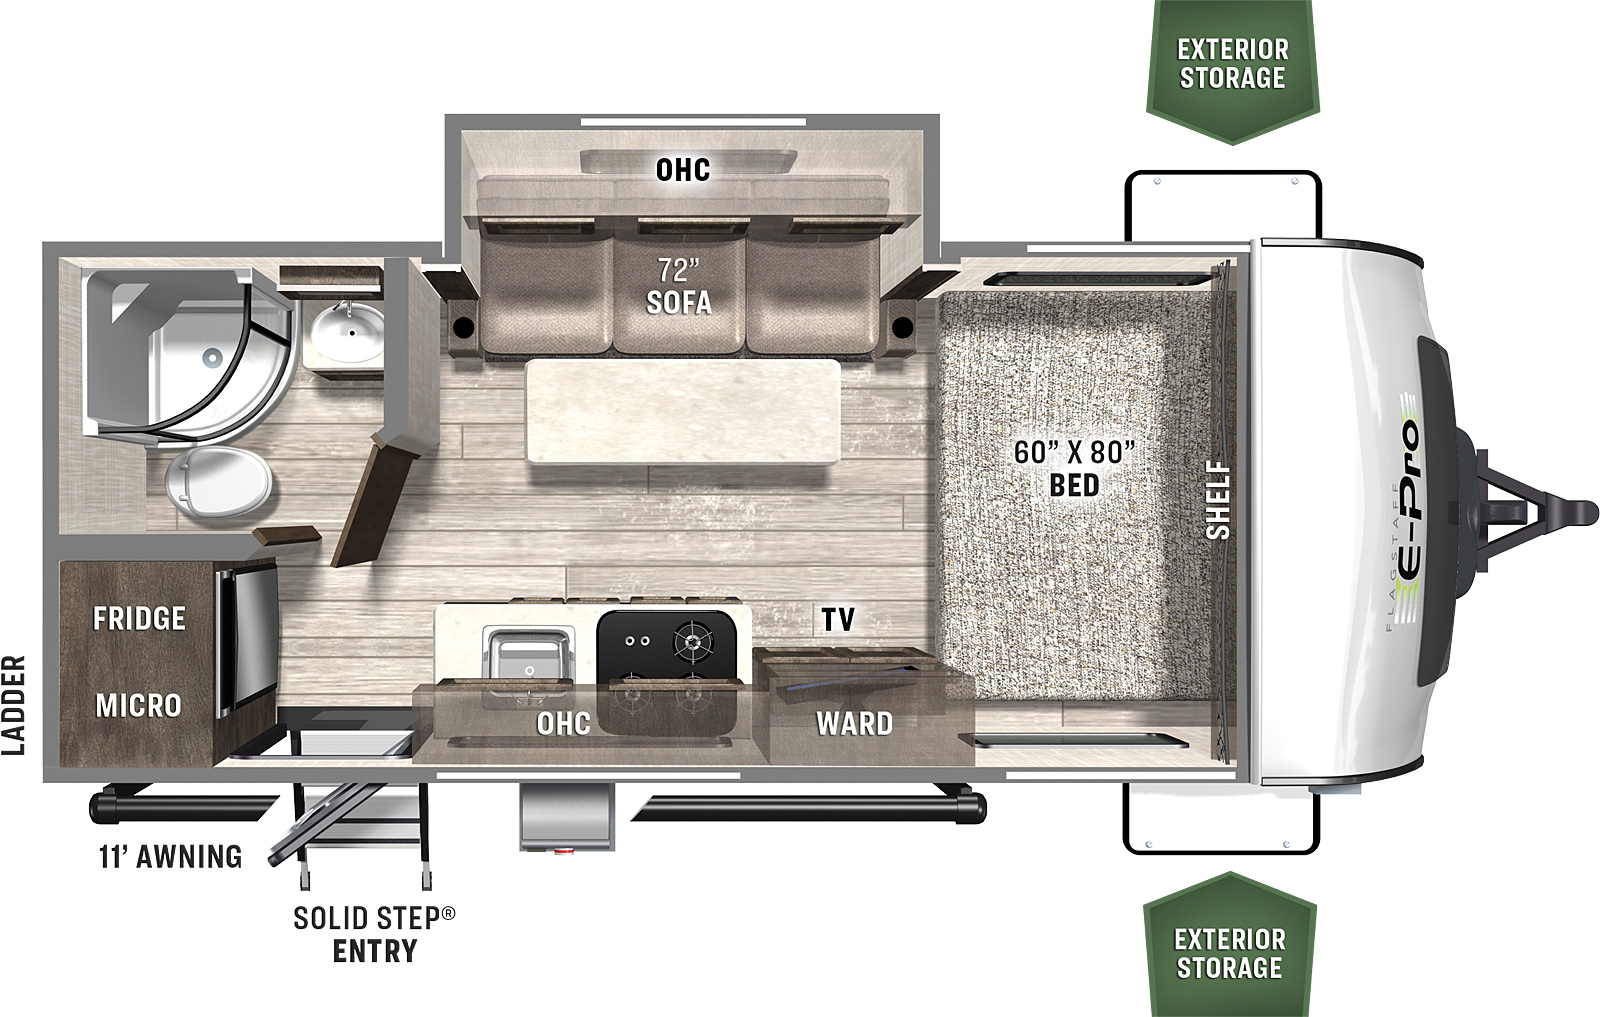 The E19FBS has one slide out on the off-door side and 1 entry door. Exterior features include exterior storage, a rear ladder, and a door side 11 foot awning. Interior layout from front to back: front bedroom with side facing 60x80 bed; kitchen dining living area with off-door side slide out containing a sofa; door side kitchen countertop; refrigerator and microwave in the door side rear corner; and a full bathroom in the off-door side rear corner.